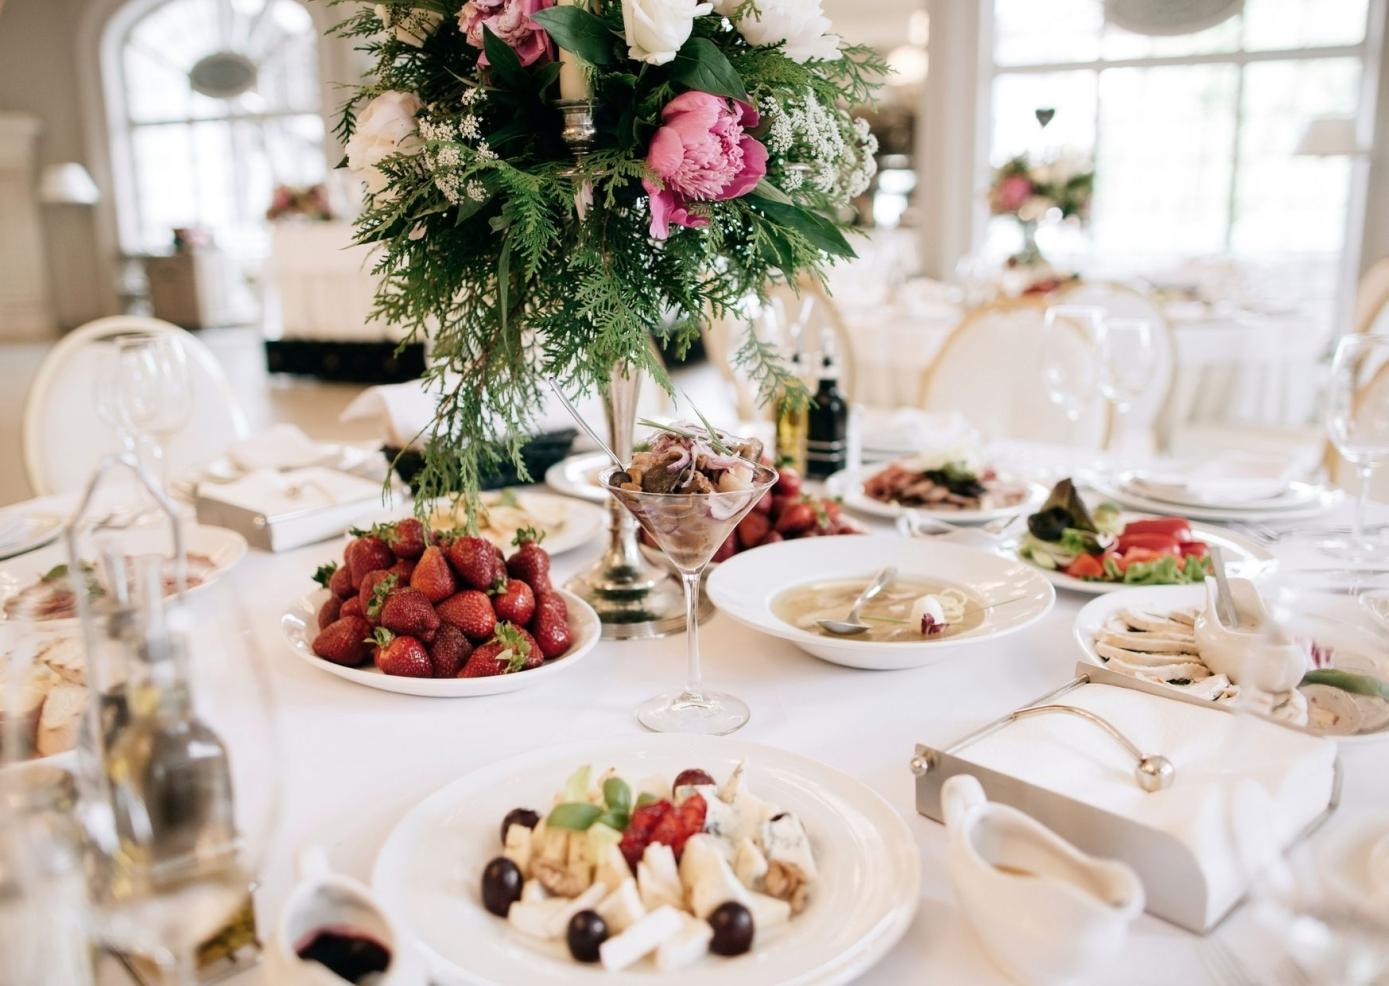 What Are The Best Catering Options For A Small Wedding?